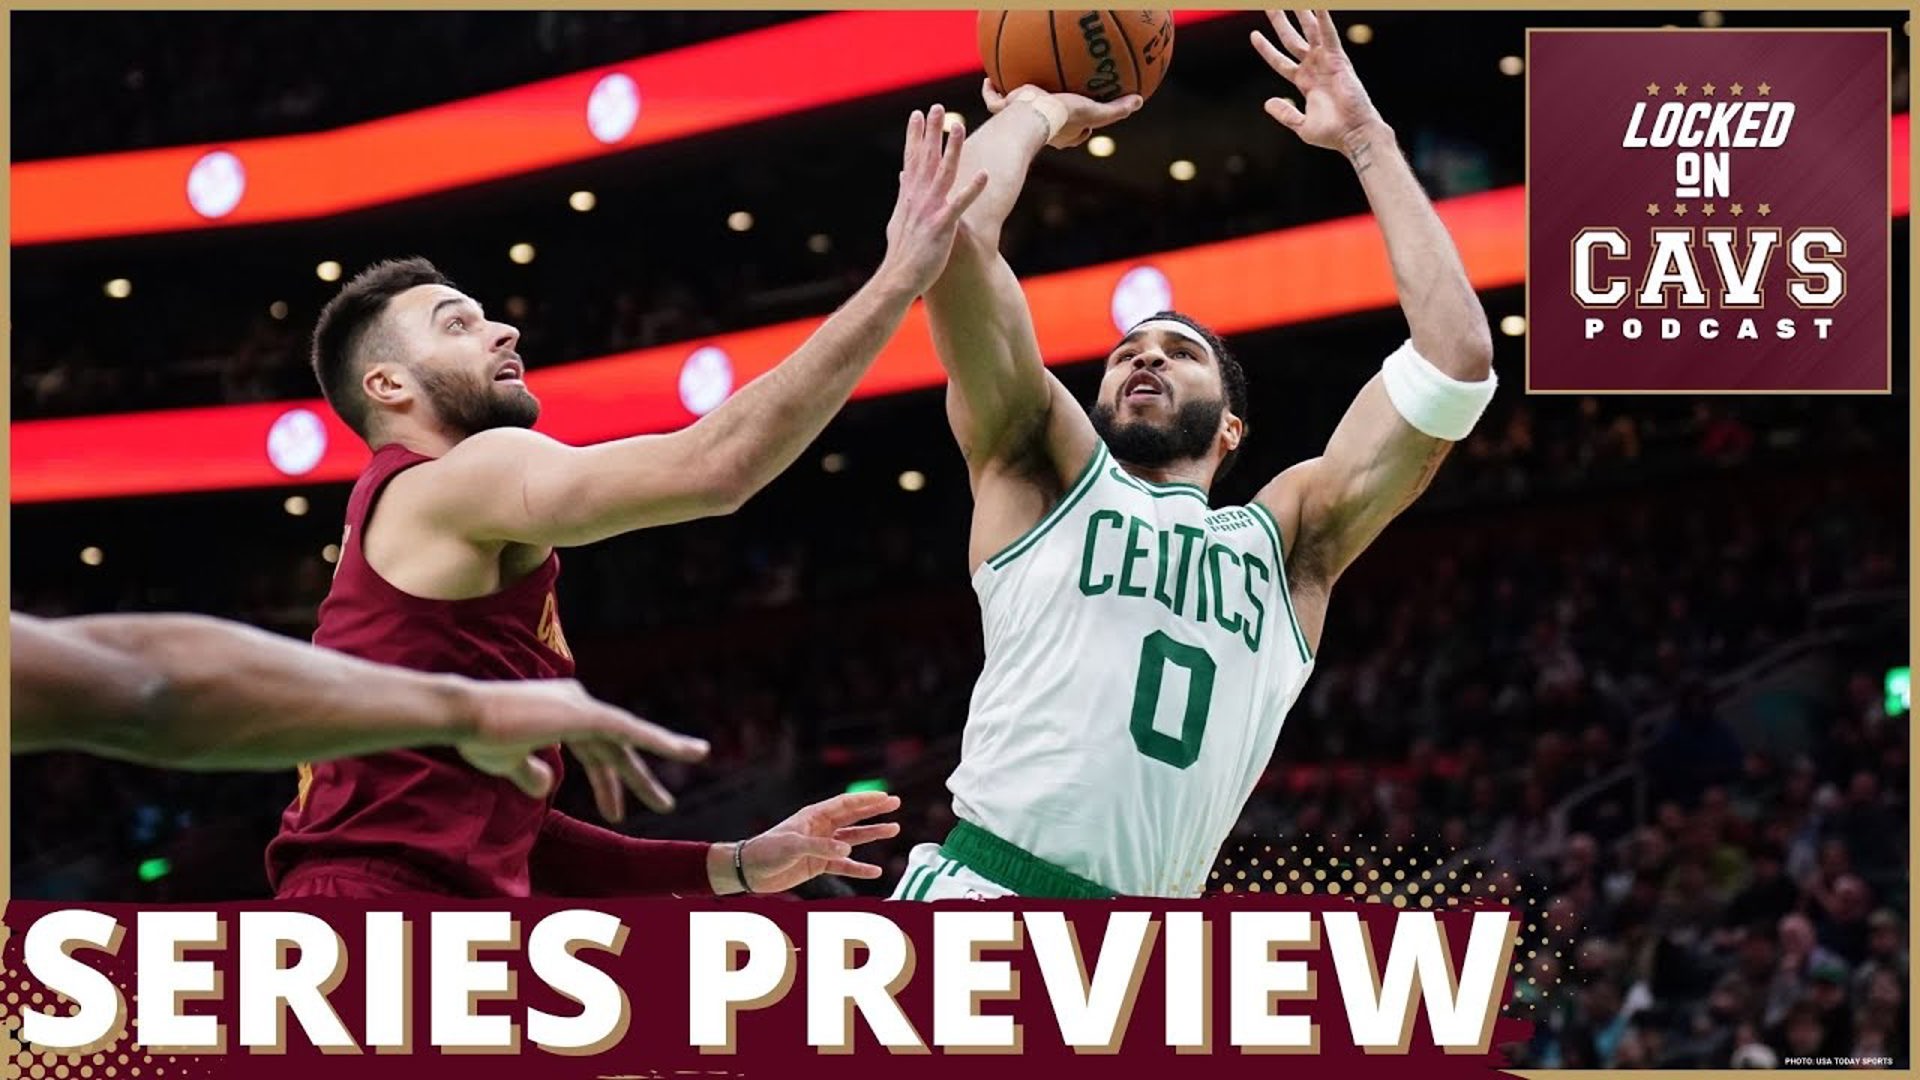 Cavs-Celtics, Kristaps Porzingis’ absence, if the Cavs are a real threat on the road and more.